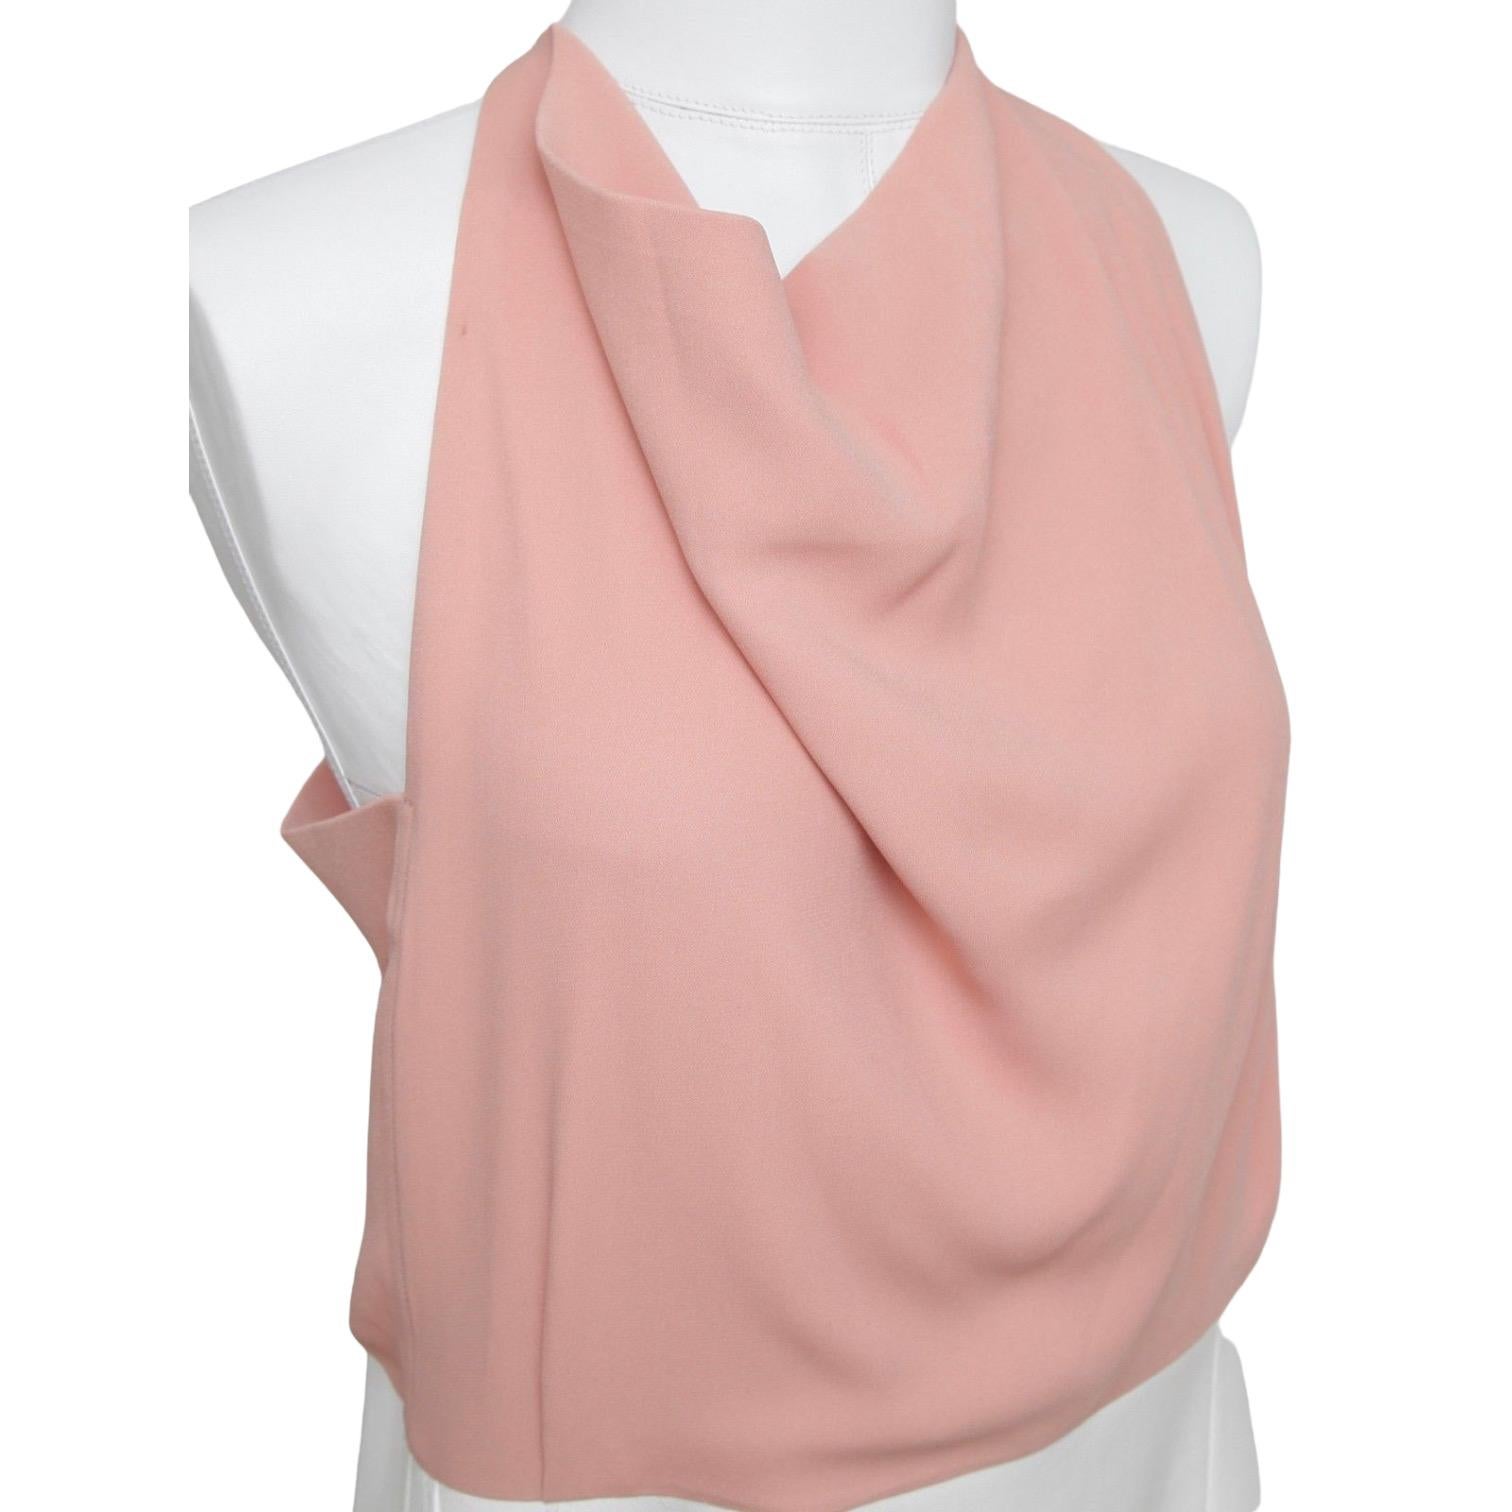 ROLAND MOURET Sleeveless Dress Cowl Neck 2016 PAGET White Pink 14 BNWT $1230 In New Condition For Sale In Hollywood, FL